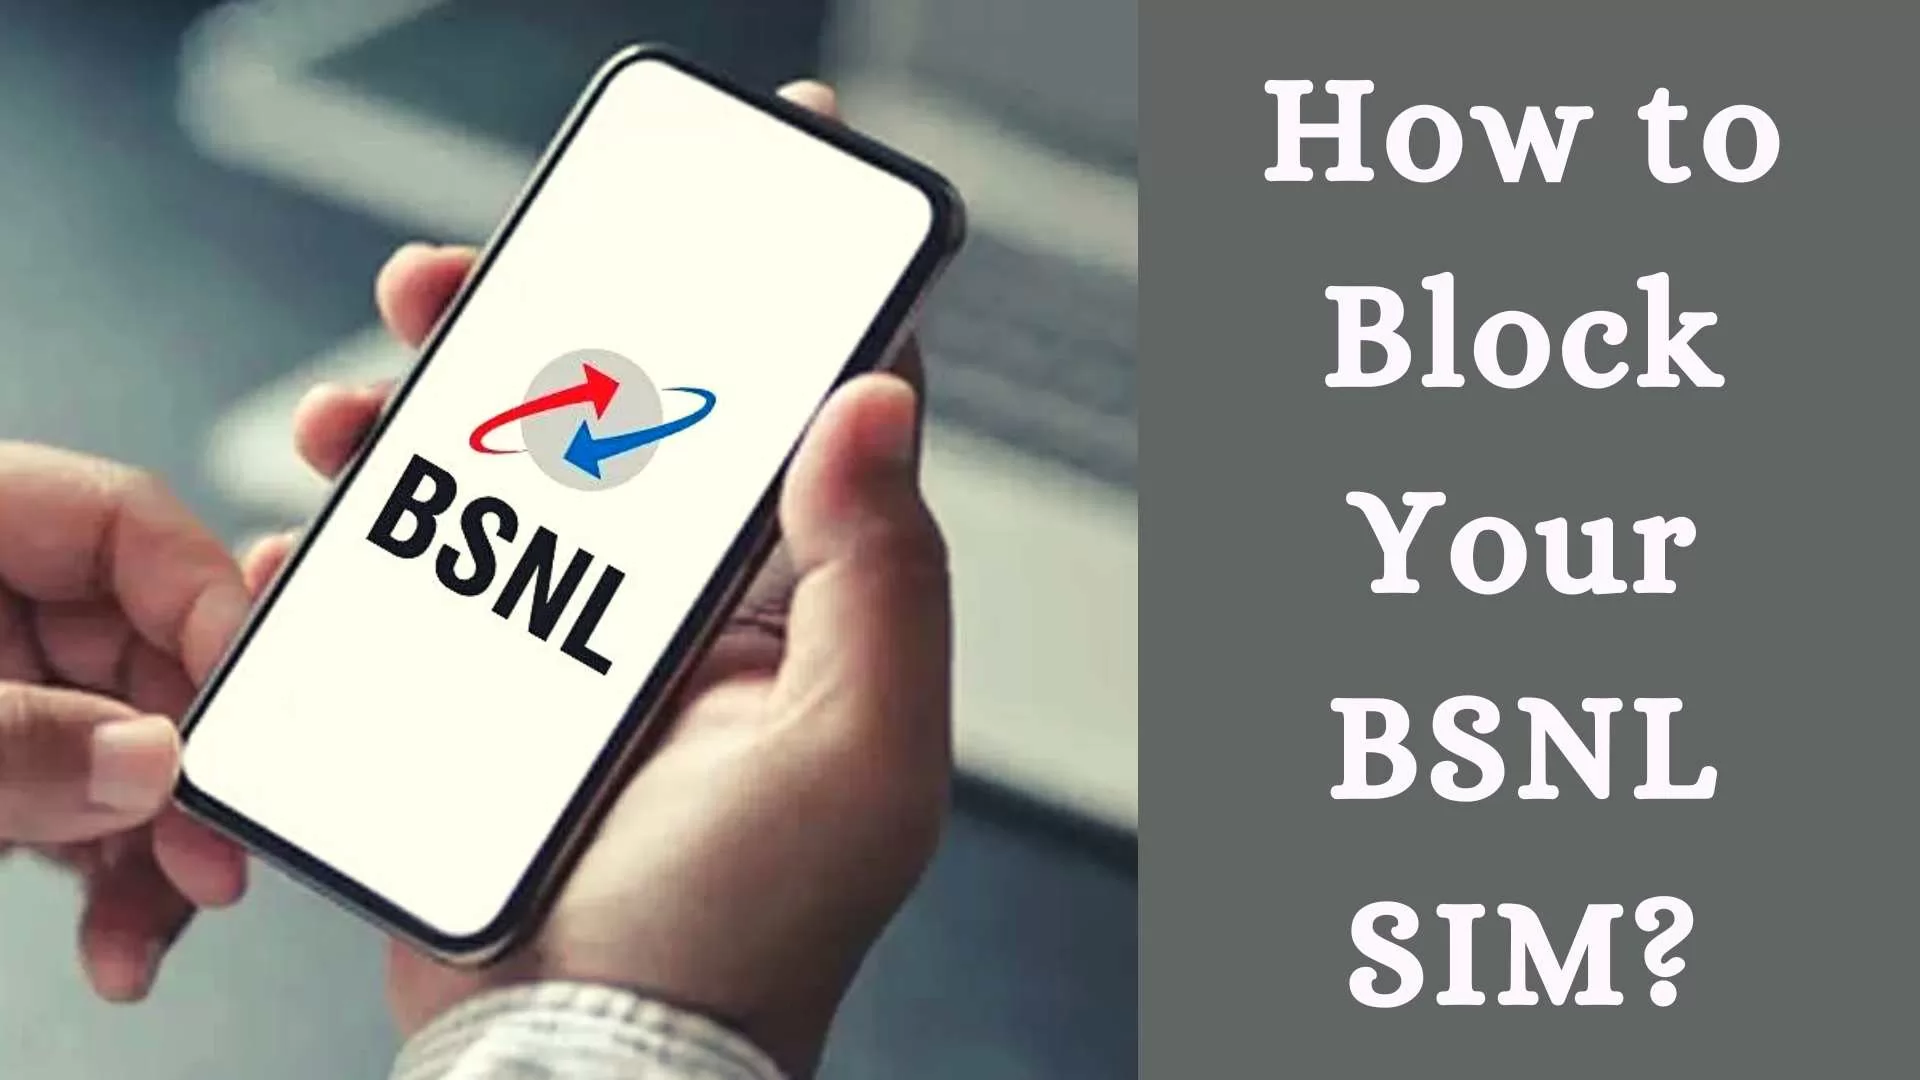 How to Block BSNL SIM Card in Minutes